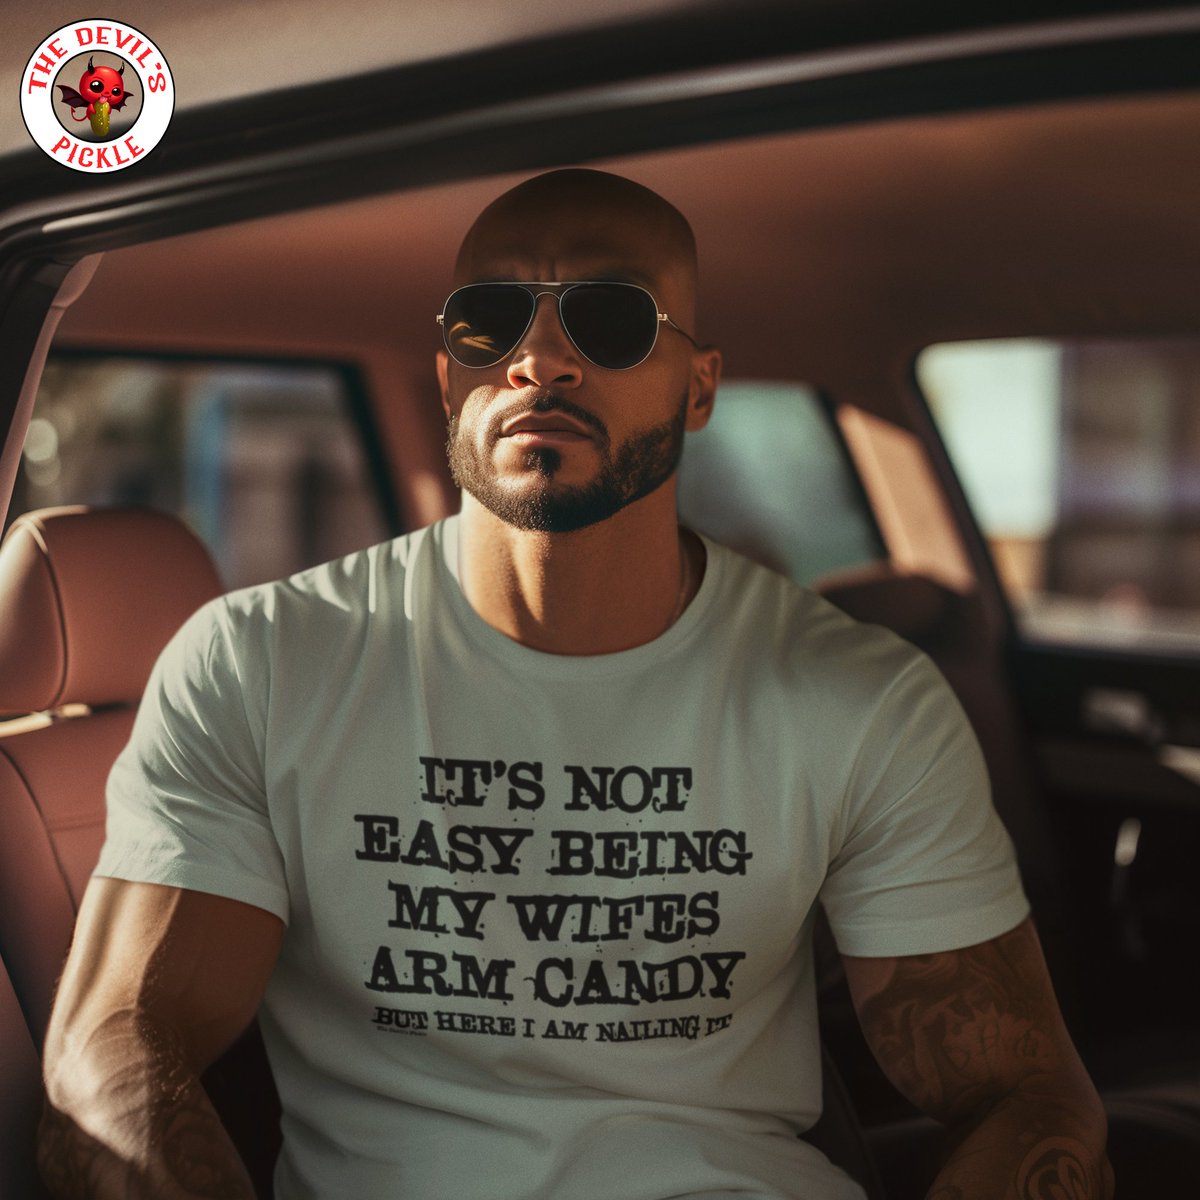 Sorry, its not easy being my wife's fabulous arm candy. Adult Humor and Funny Tees, Hoodies and More!

#adultjokes #bestshirts #adultmeme #adulttees #adulthumor #getyourown #winning #adultinghumor #funshirts #offensivetshirts #onlythebest #pickleproud #funnyapparel #freeshipping